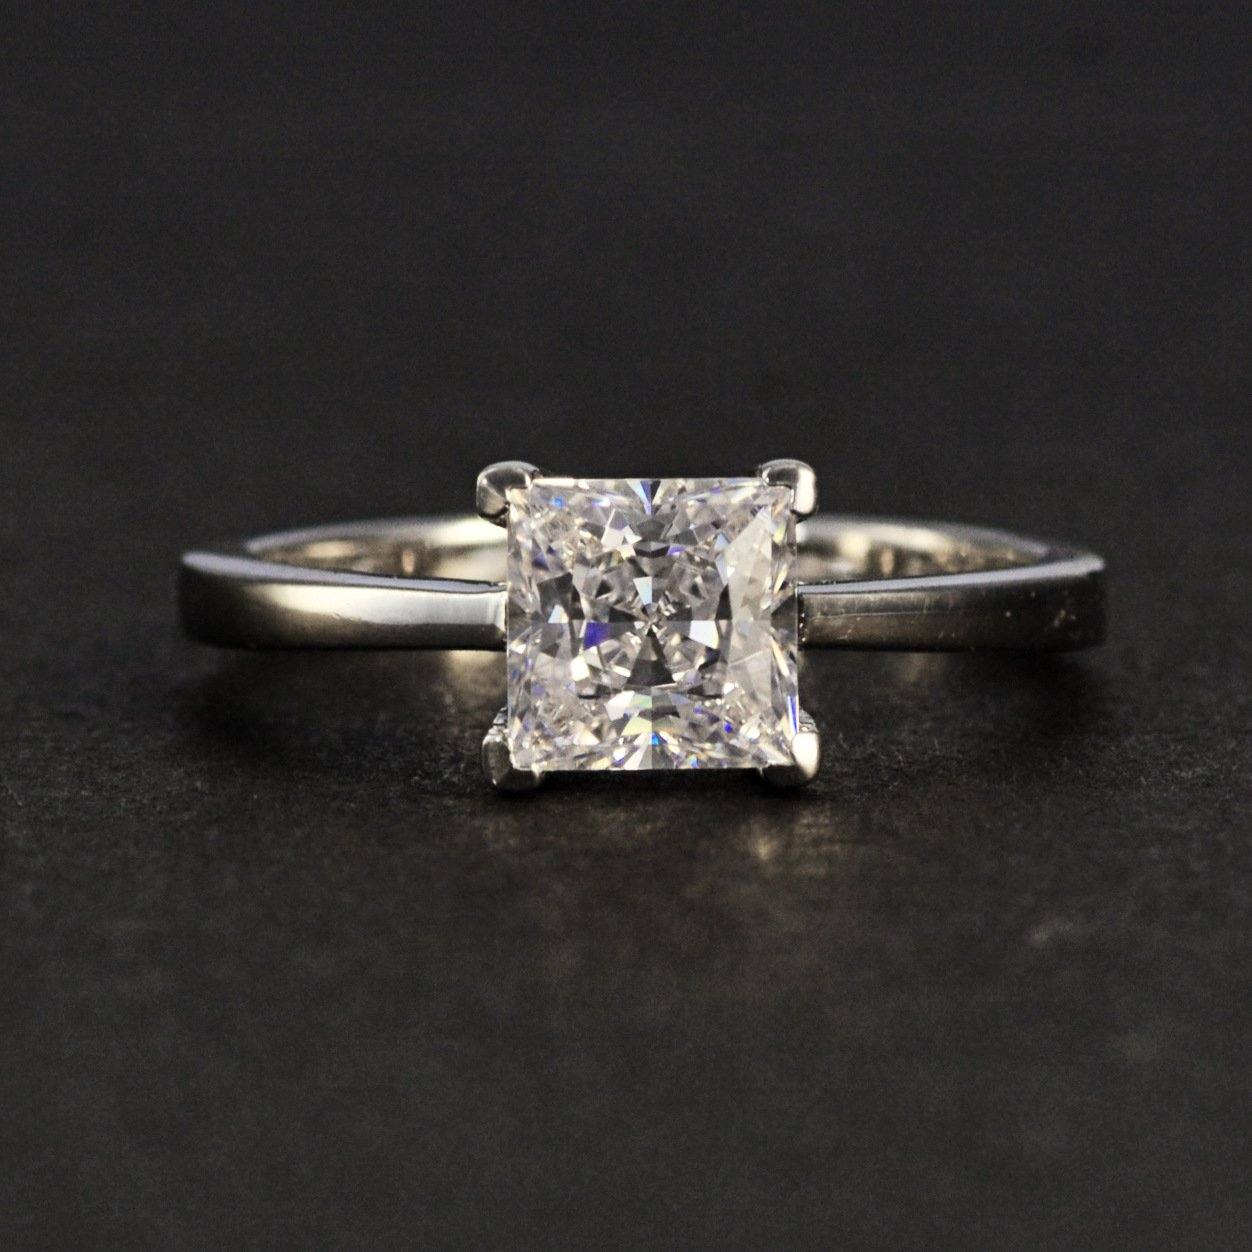 Princess Cut Solitaire Ring - HER'S